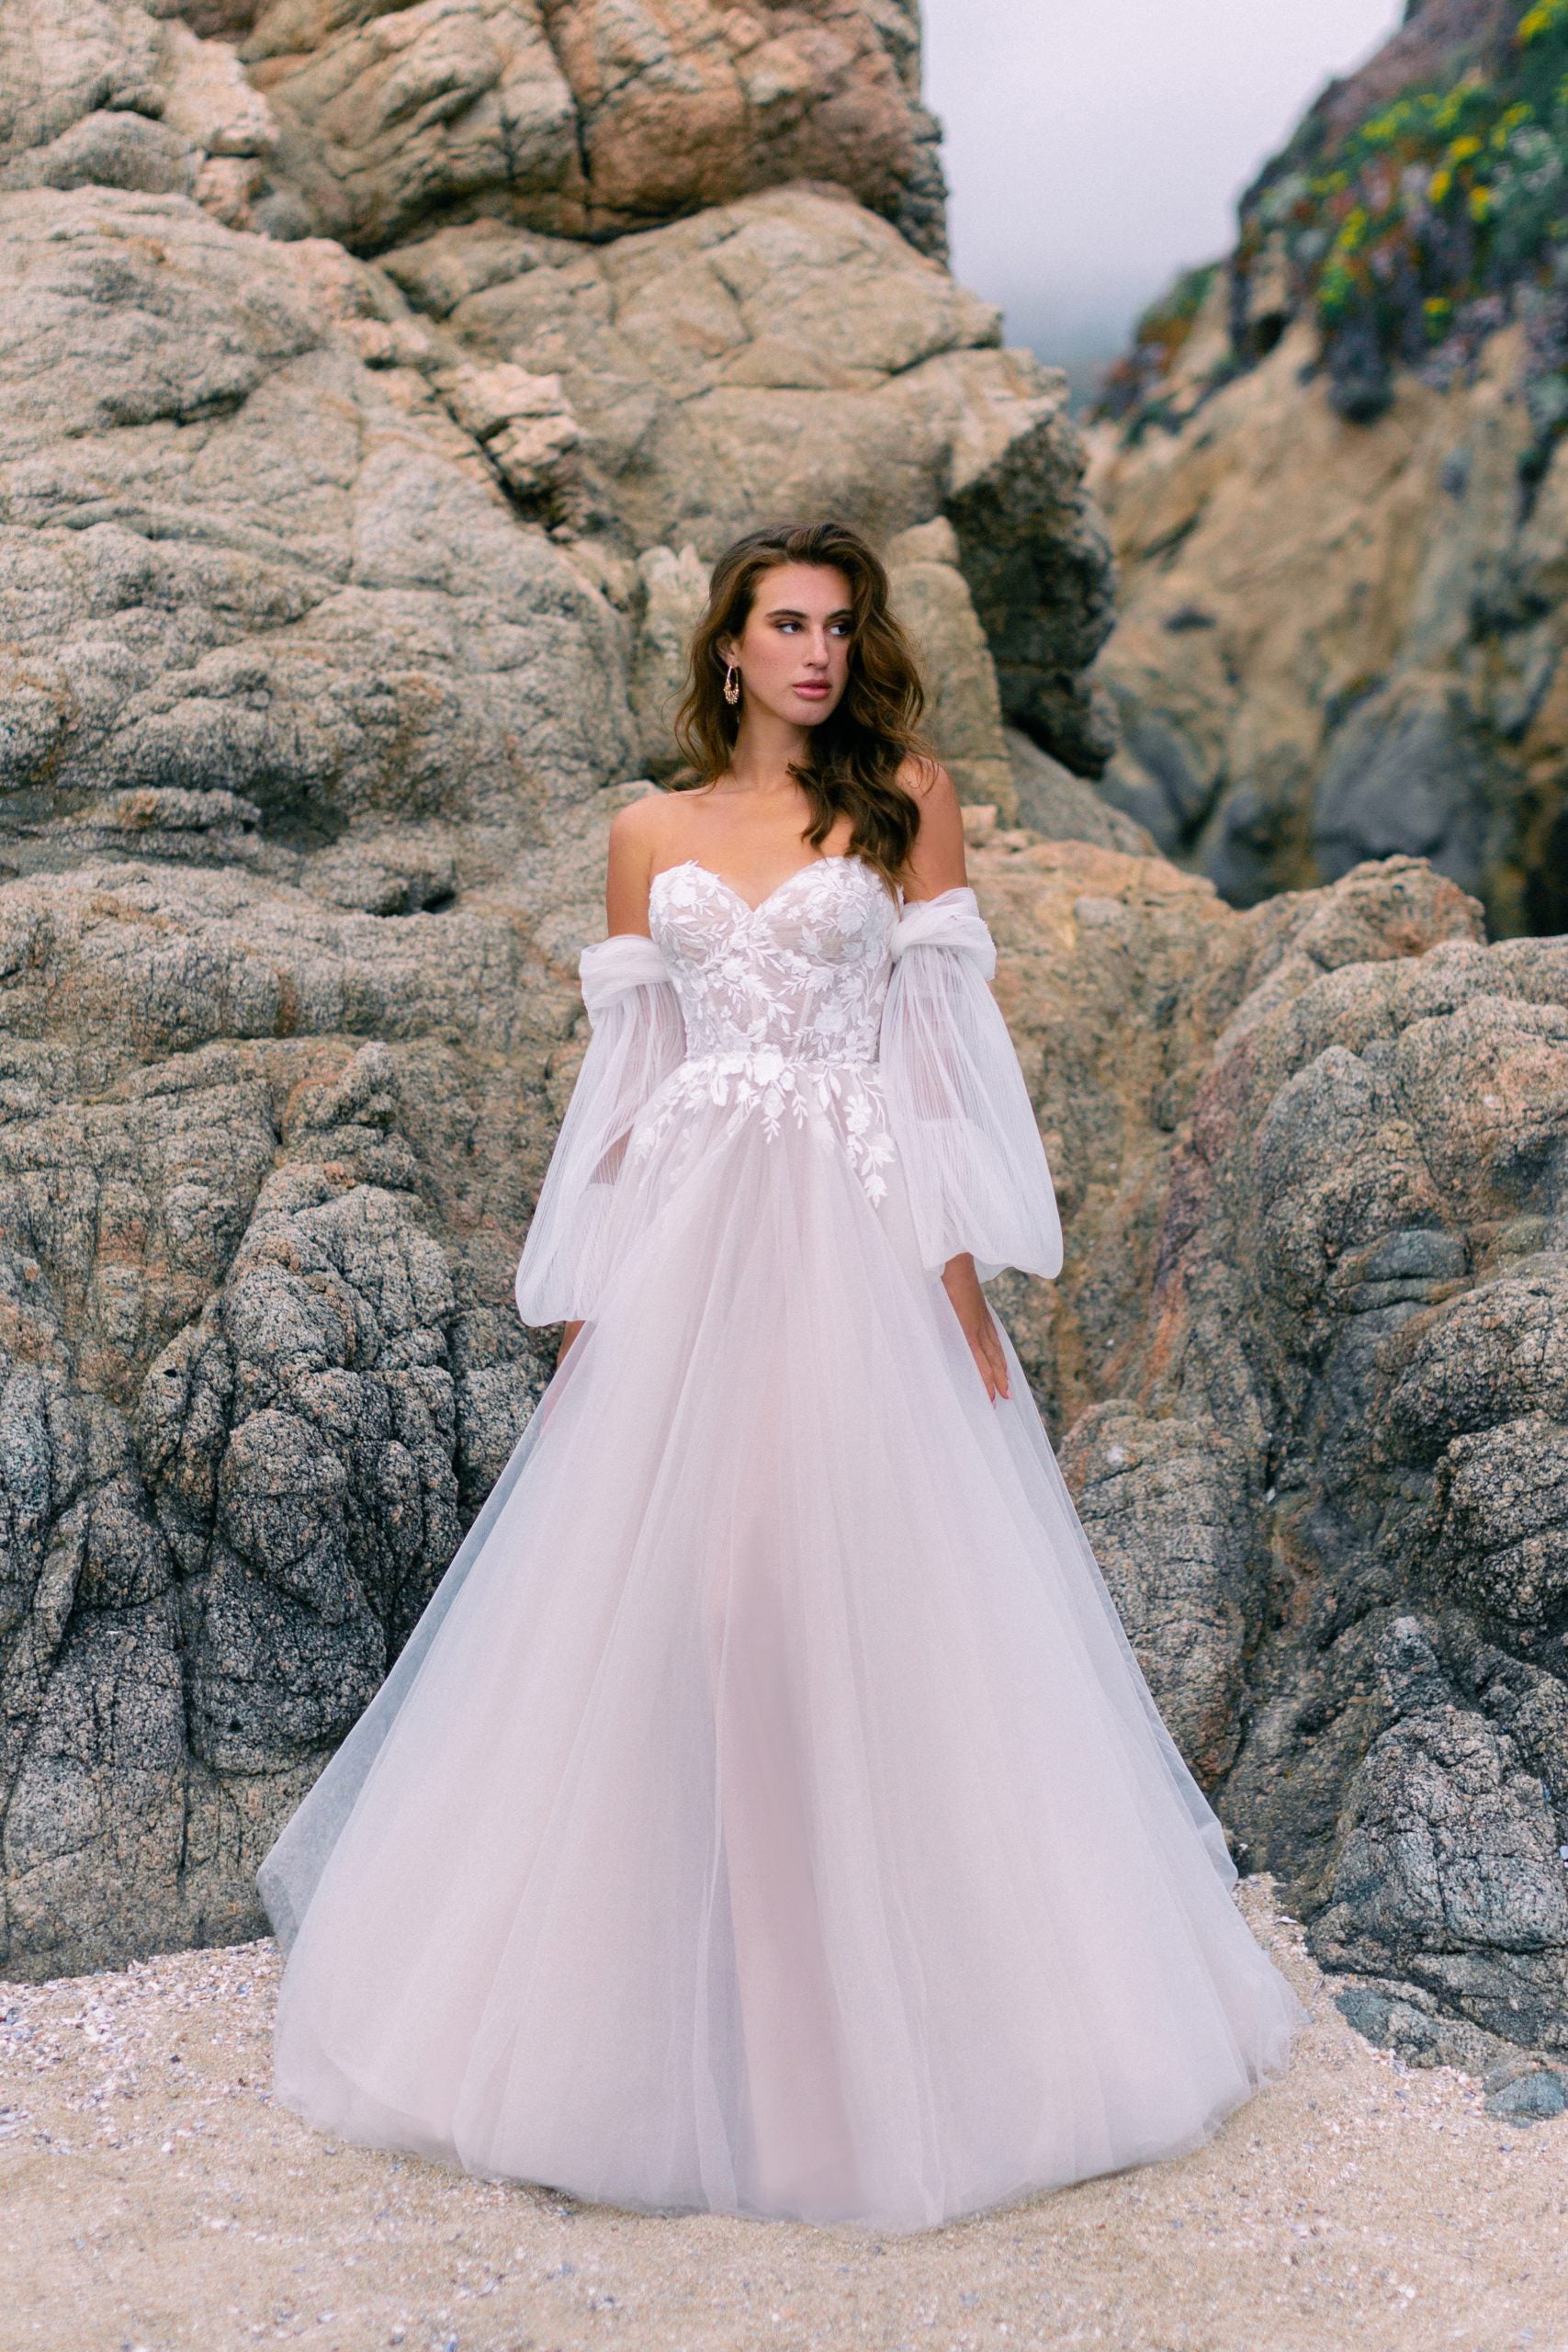 Detachable Tulle Puff Sleeves by Allure Bridals - Image 1